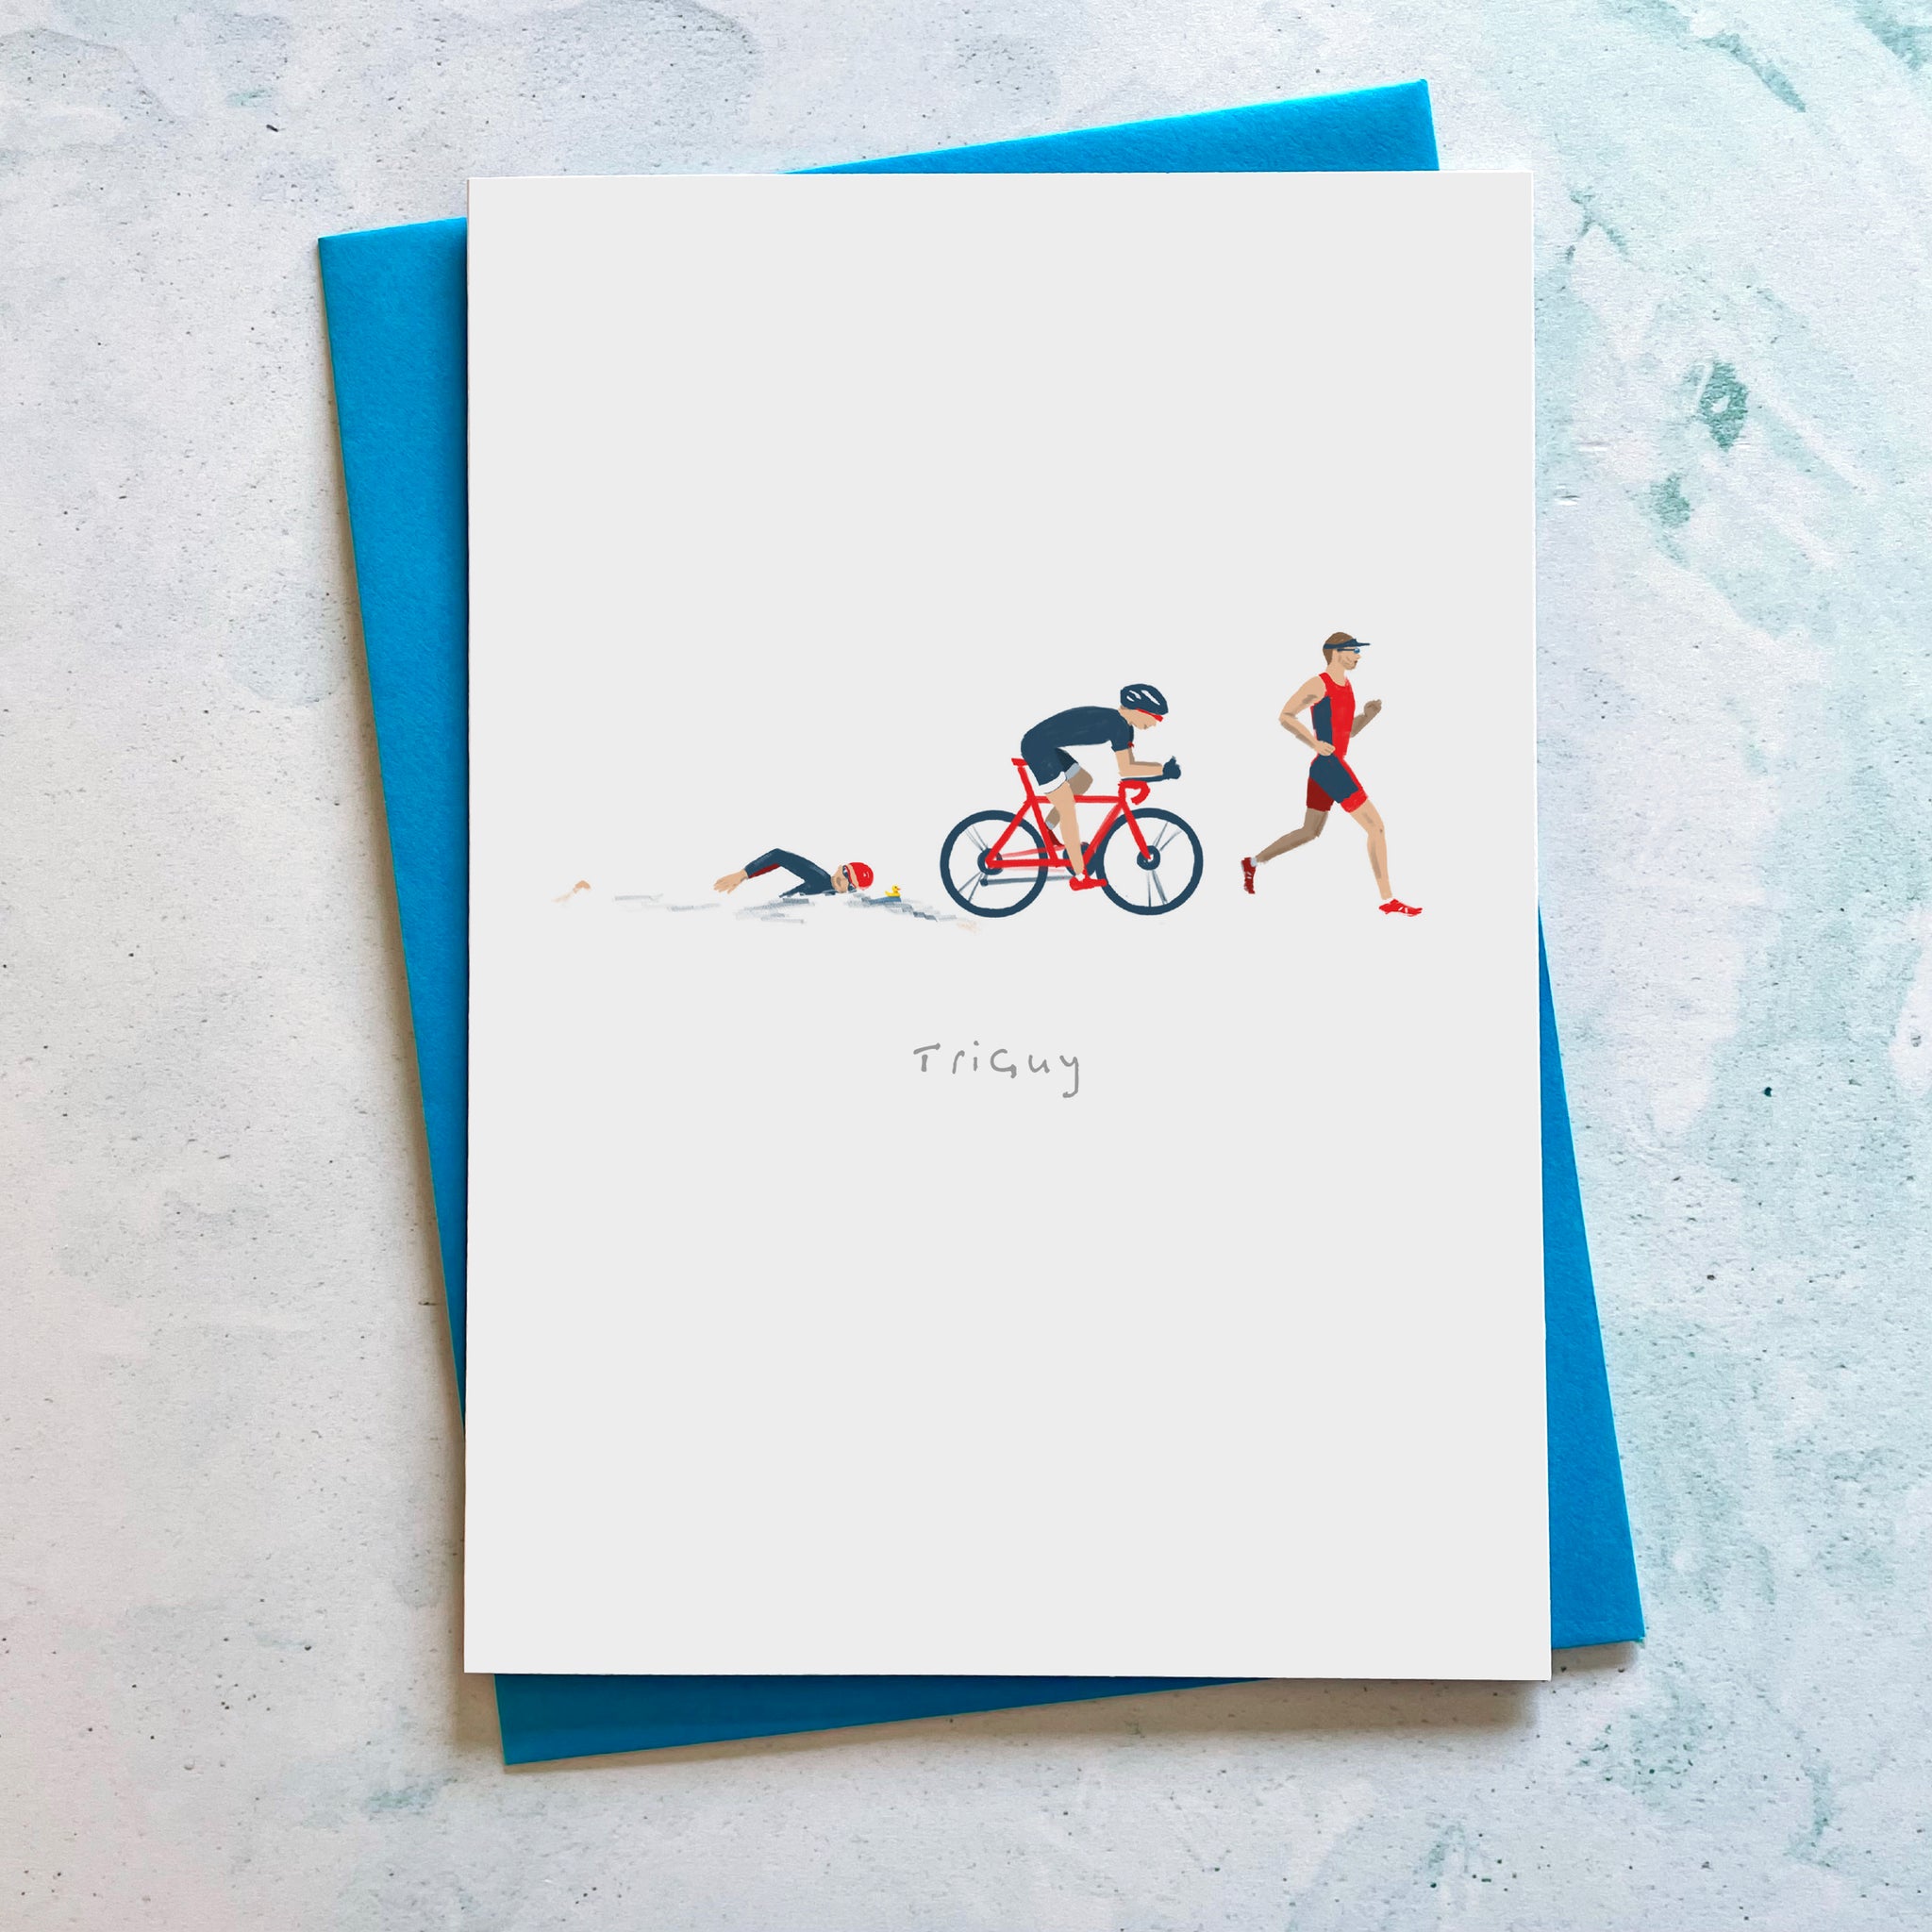 TriGuy triathlon guy greetings card for any occasion